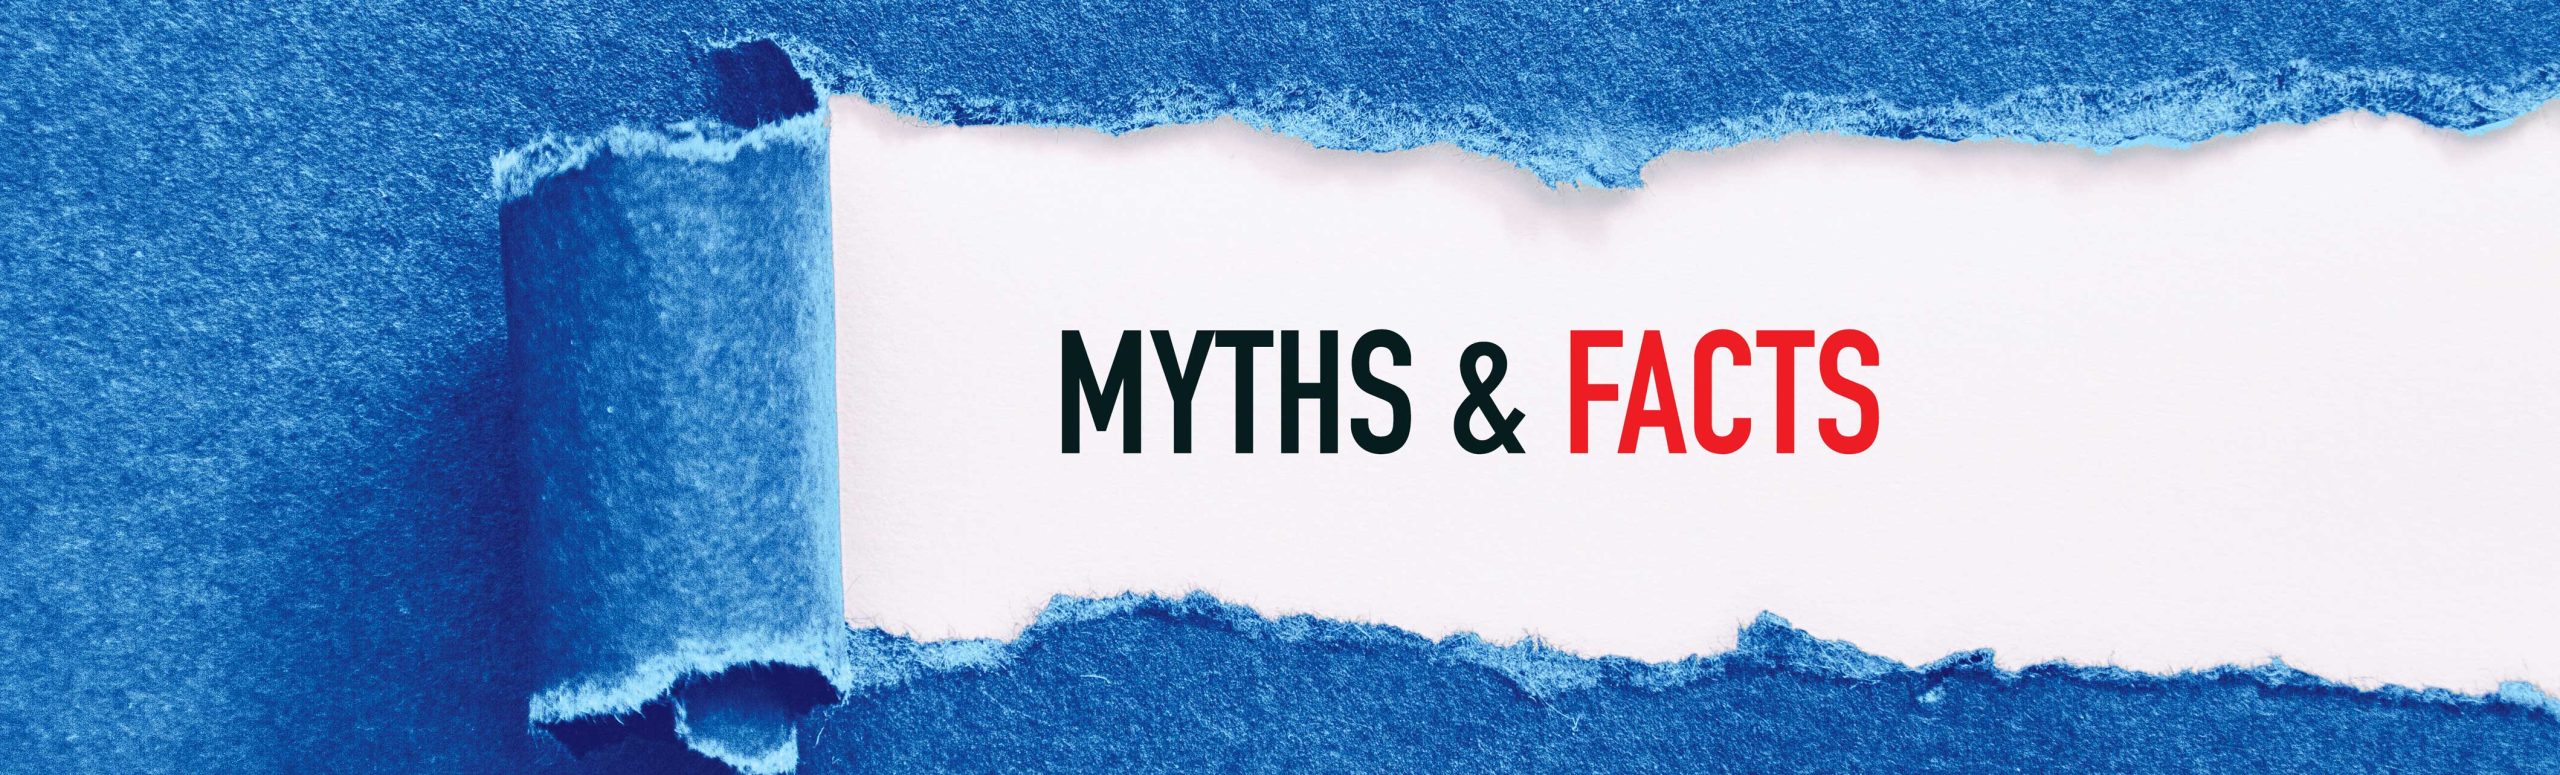 heat pumps myth and facts